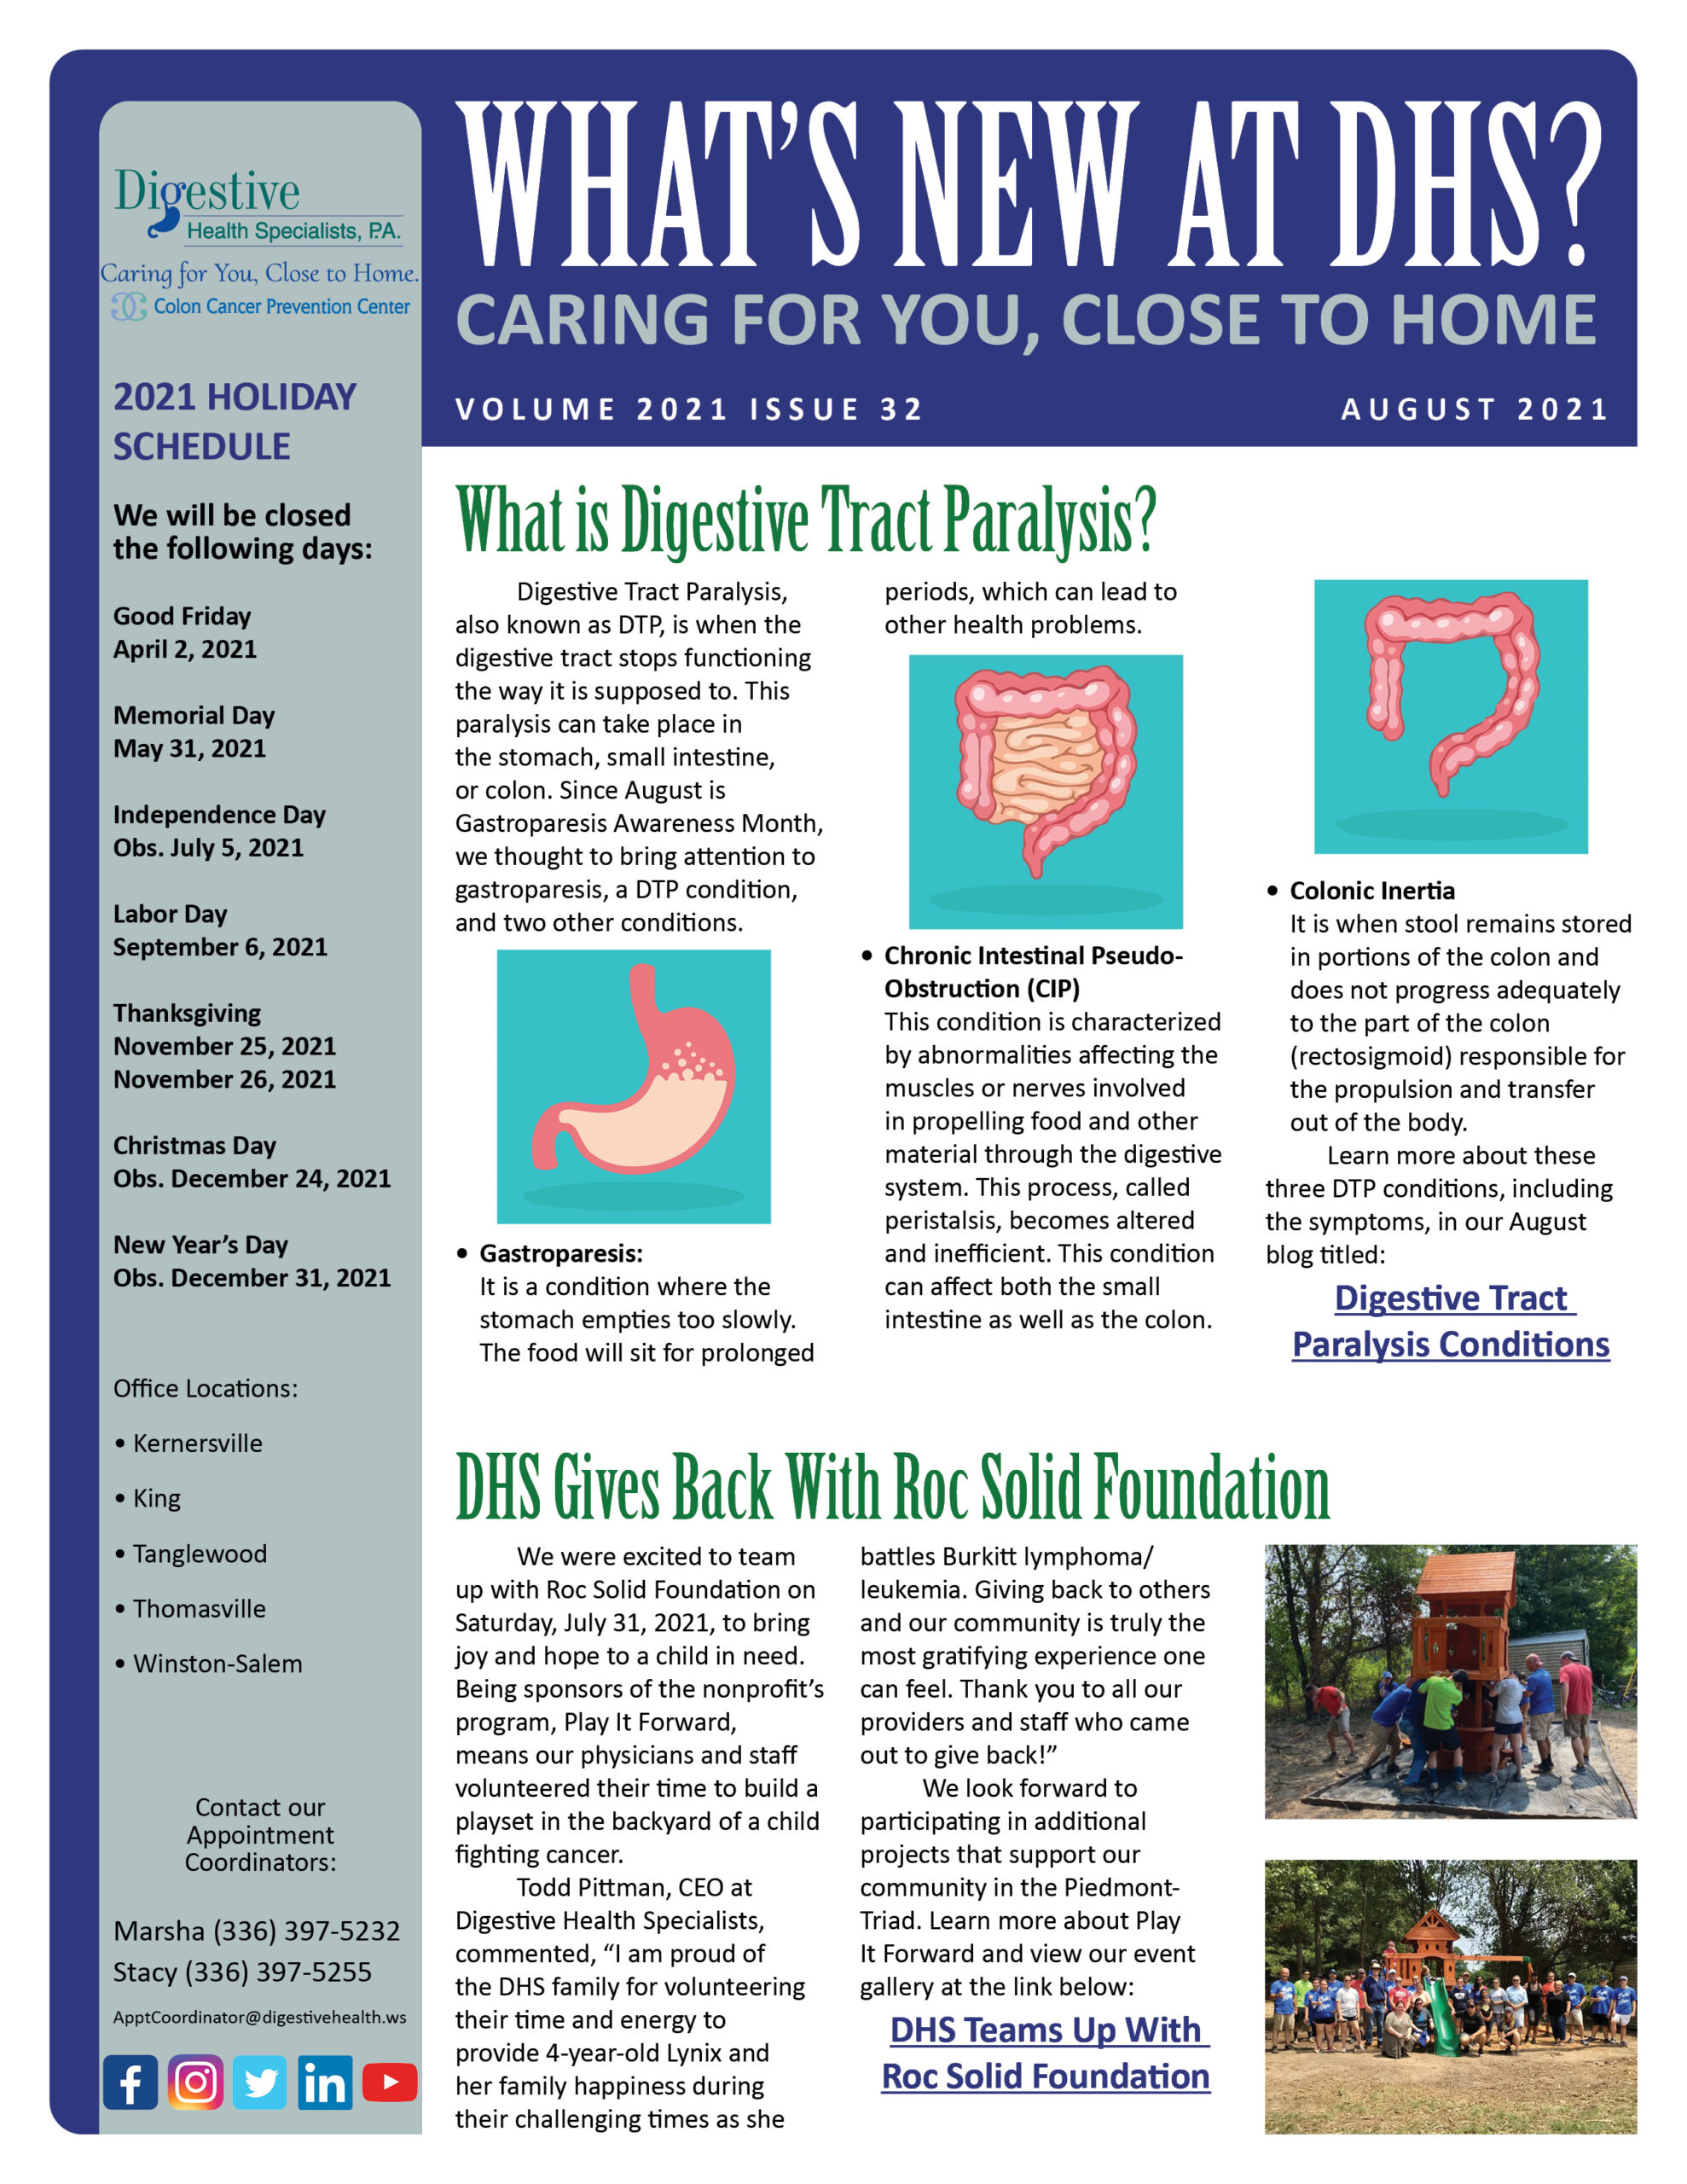 August 2021 referring practice newsletter about digestive tract paralysis and roc solid foundation